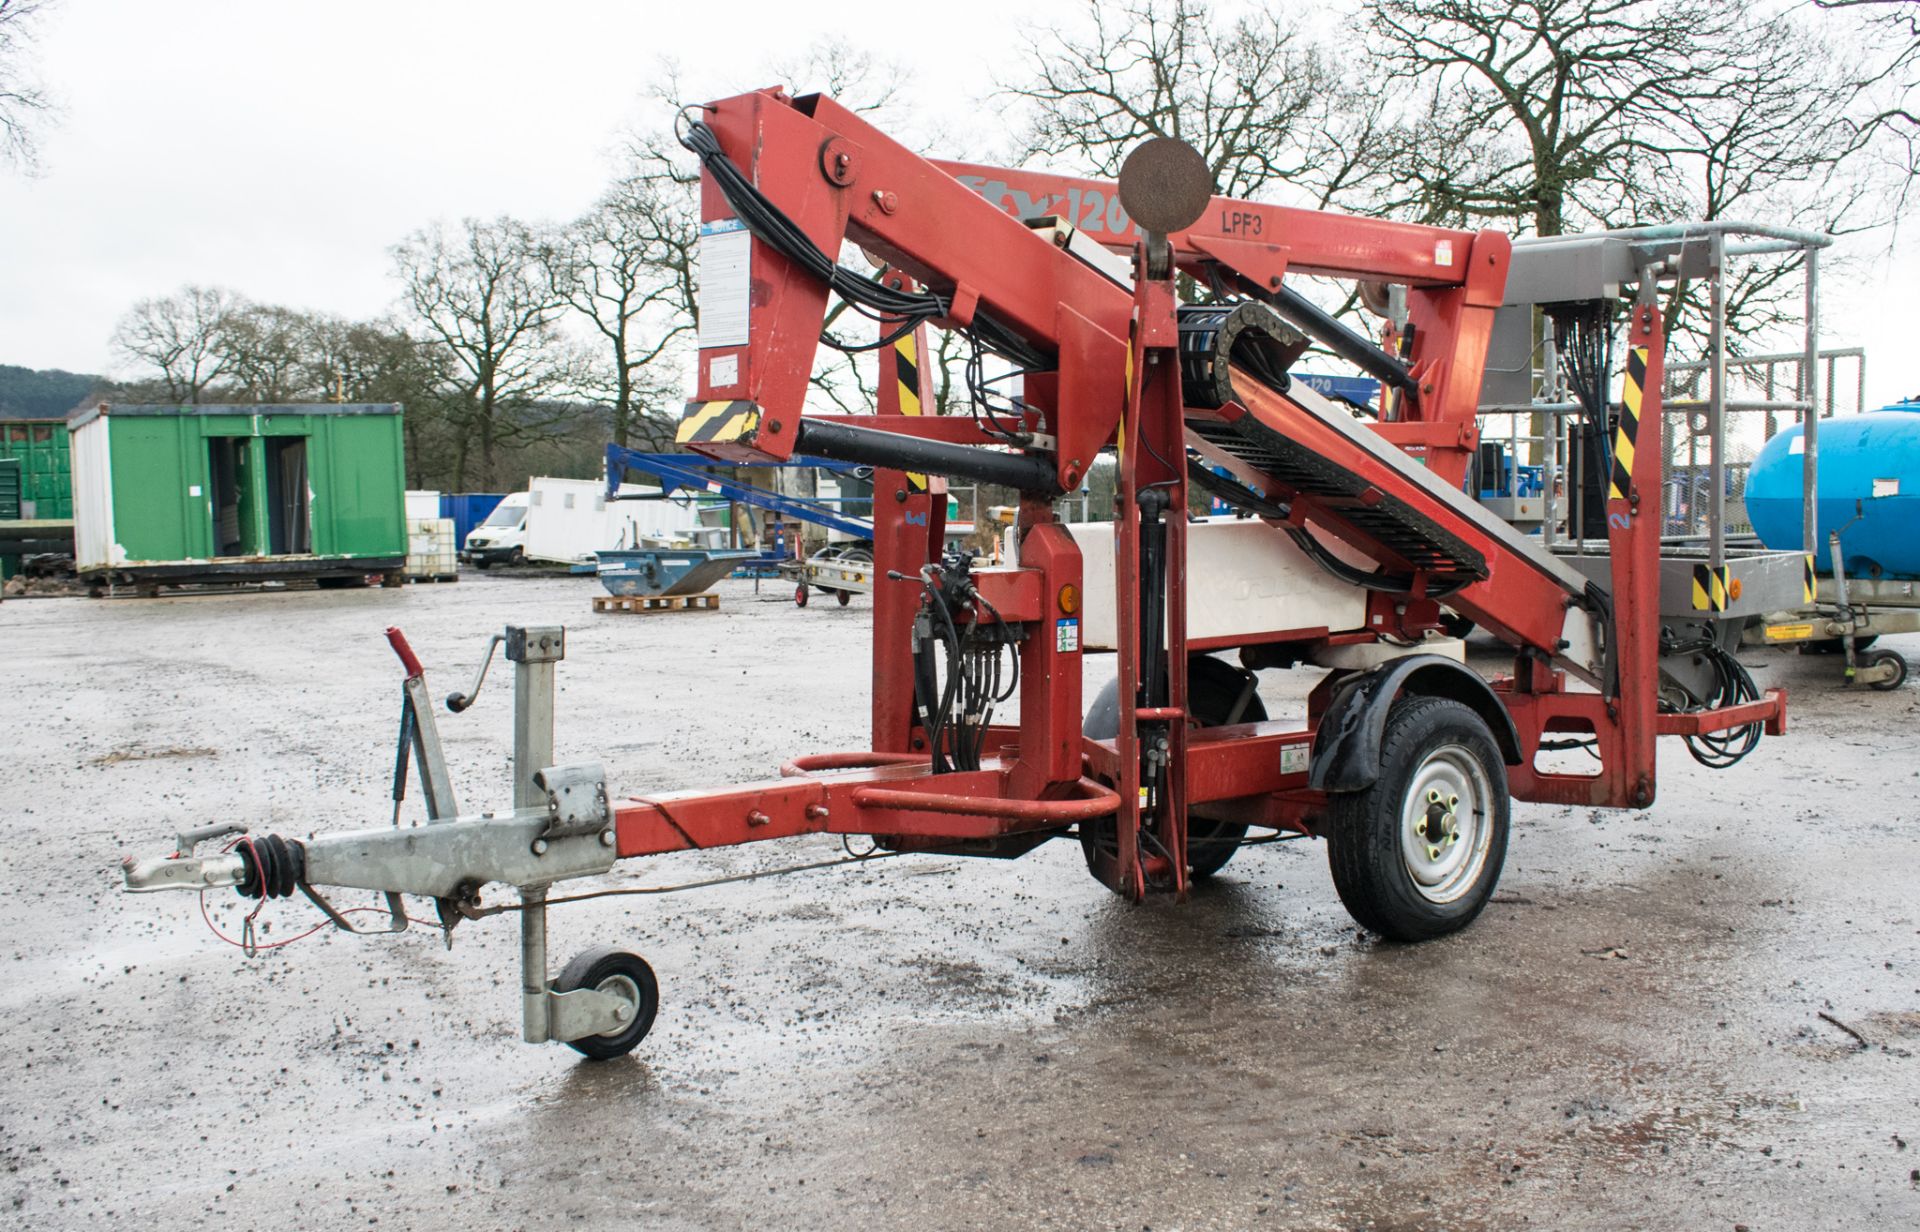 Nifty 120 TE fast tow articulated boom lift access platform Year: 2005 S/N: 0413653 WOOLPF3 - Image 2 of 9